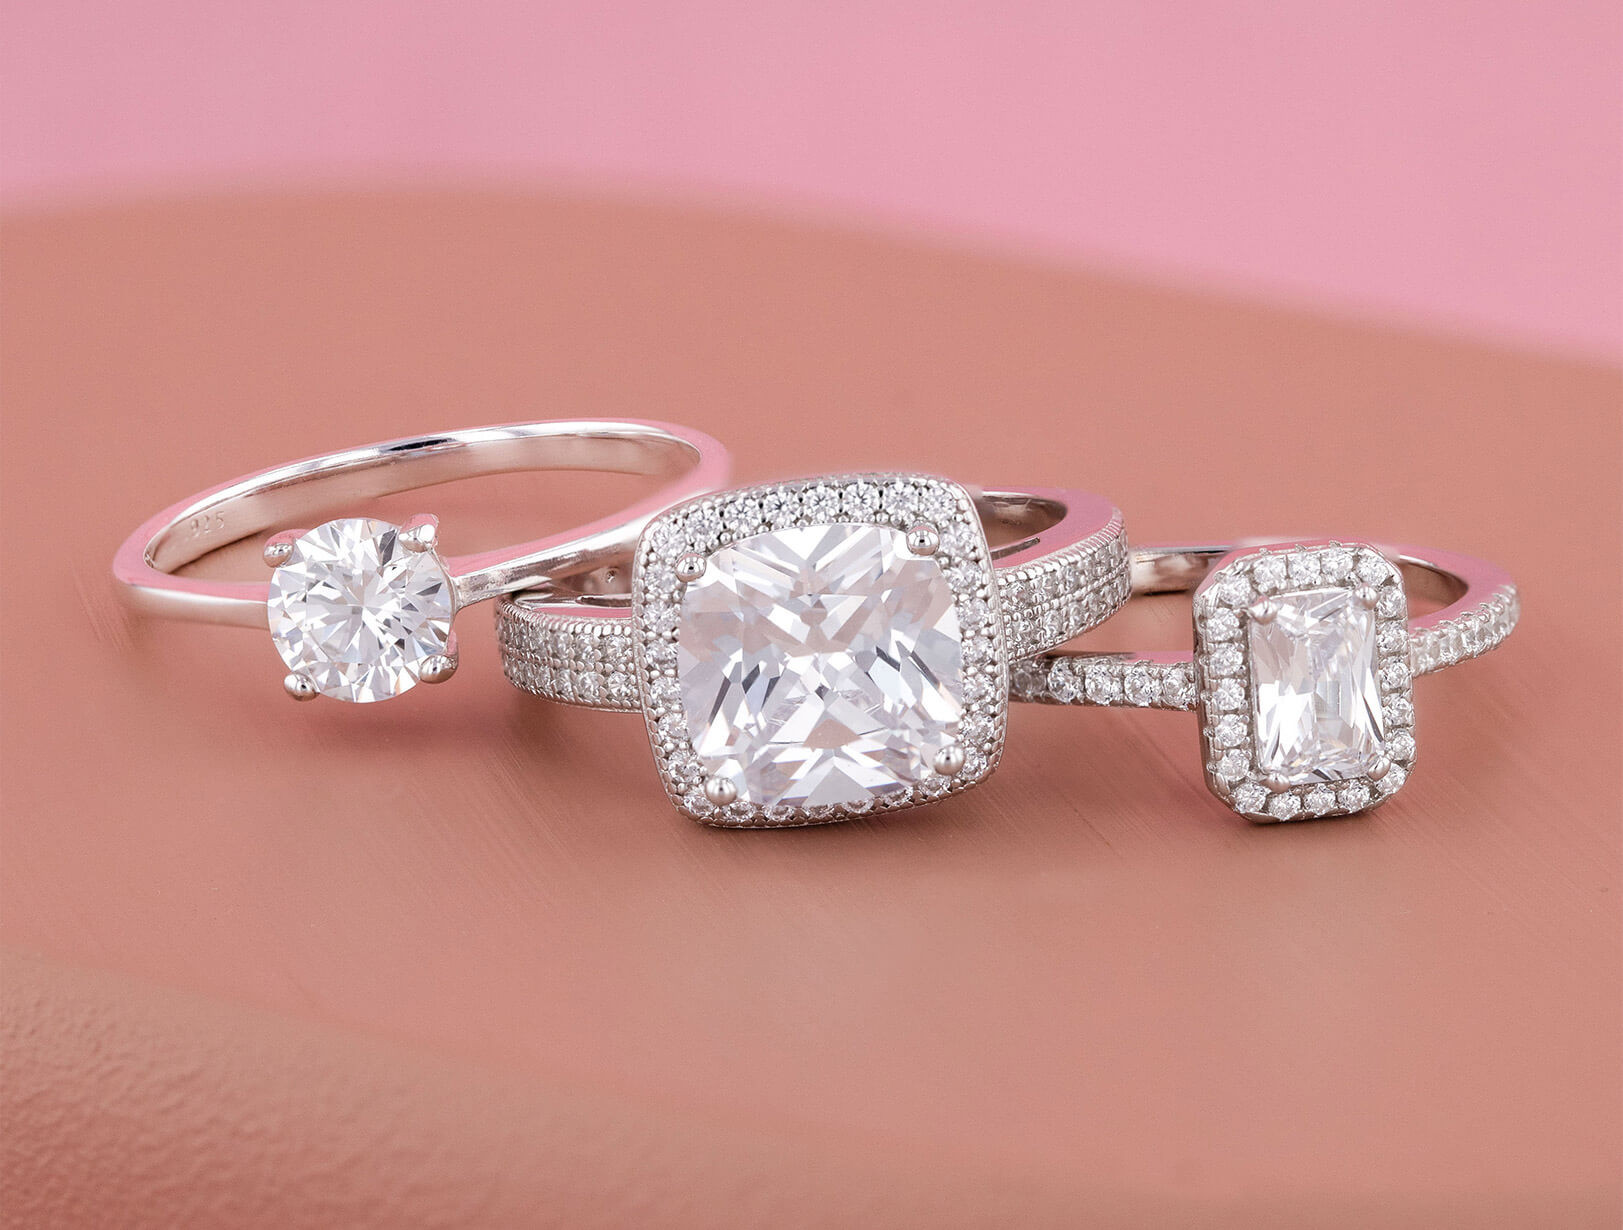 Best Silver Engagement Rings